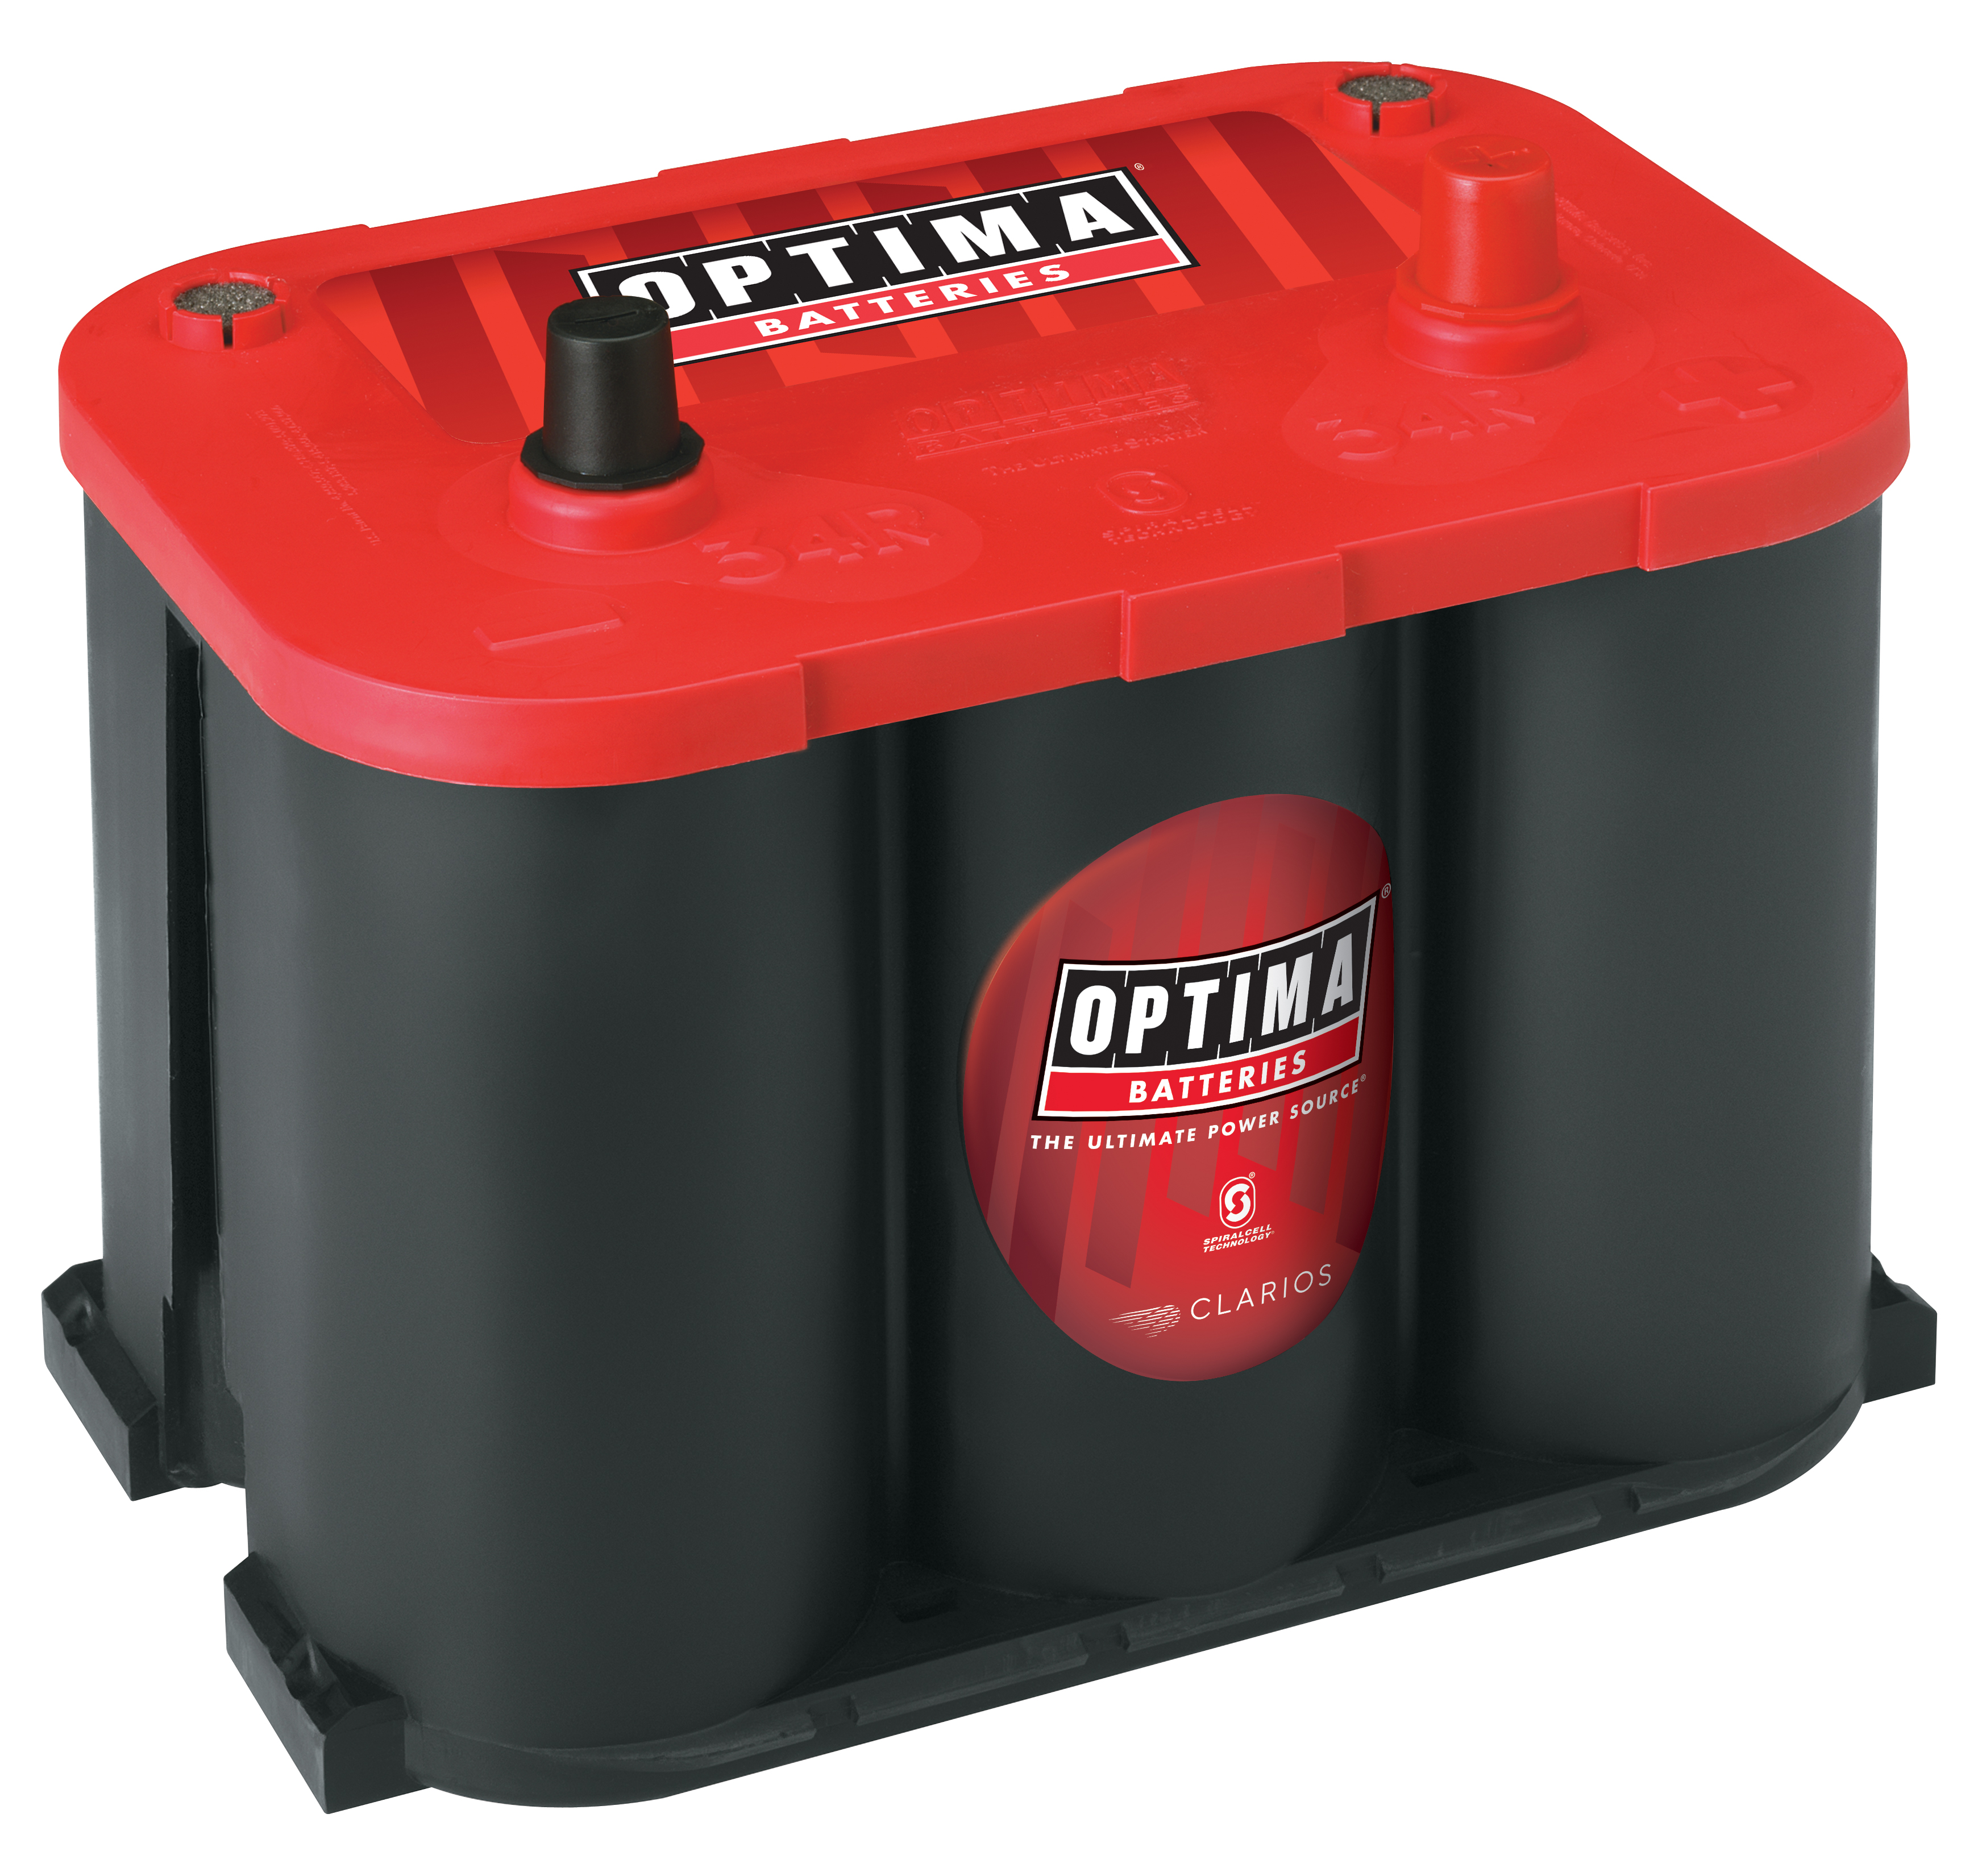 OPTIMA RedTop AGM Spiralcell Automotive Starting Battery, Group Size 34R, 12 Volt 800 CCA - image 1 of 5